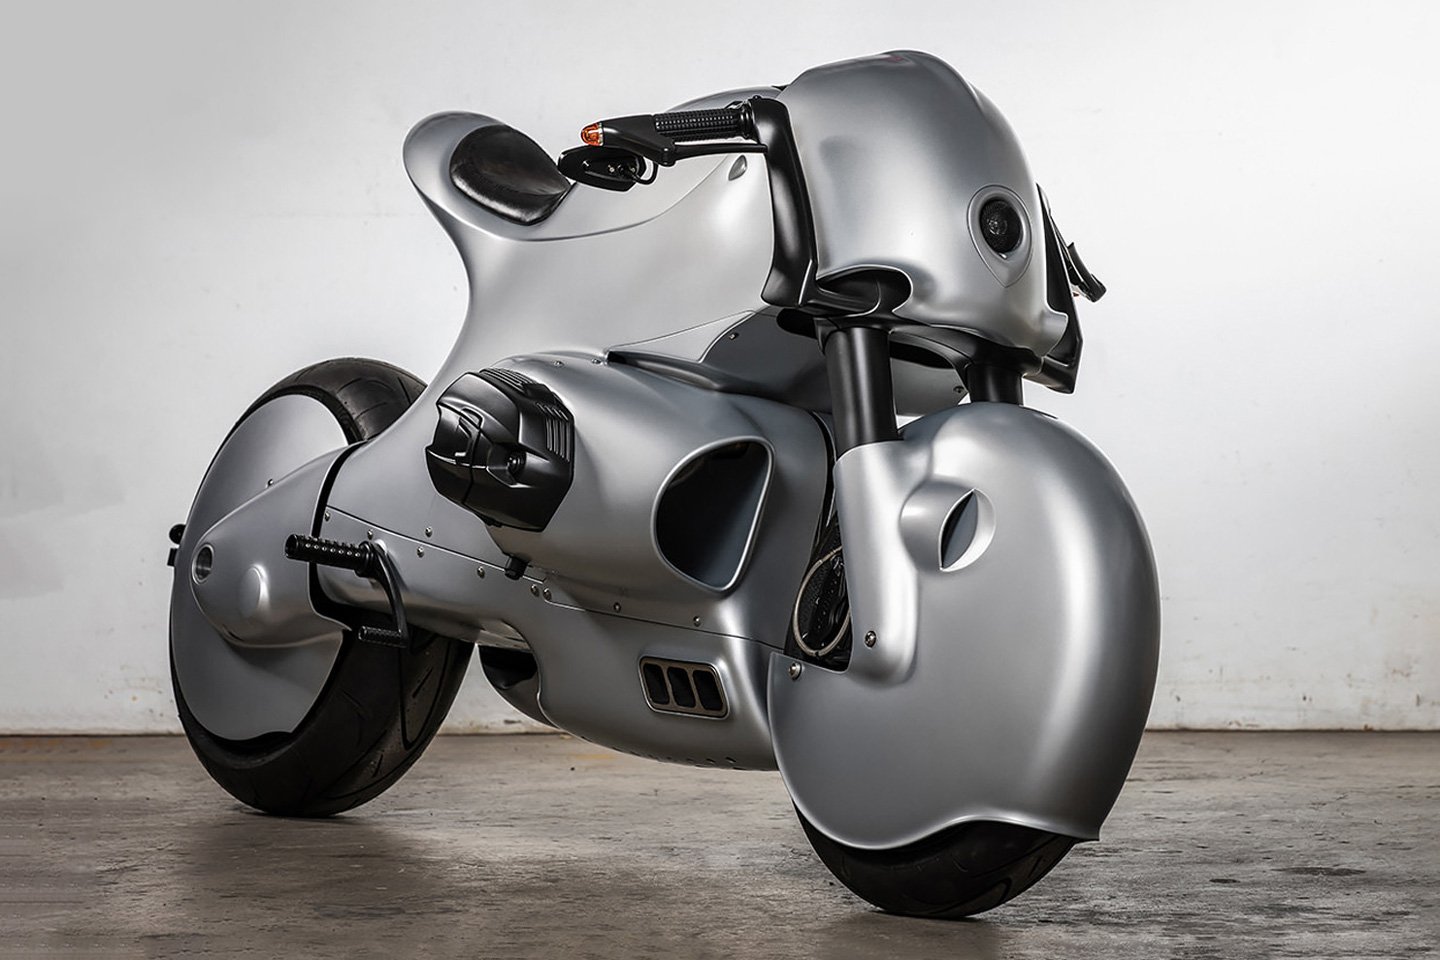 #Stunning BMW R nineT custom with a curved aluminum body looks like something out of an alternate reality